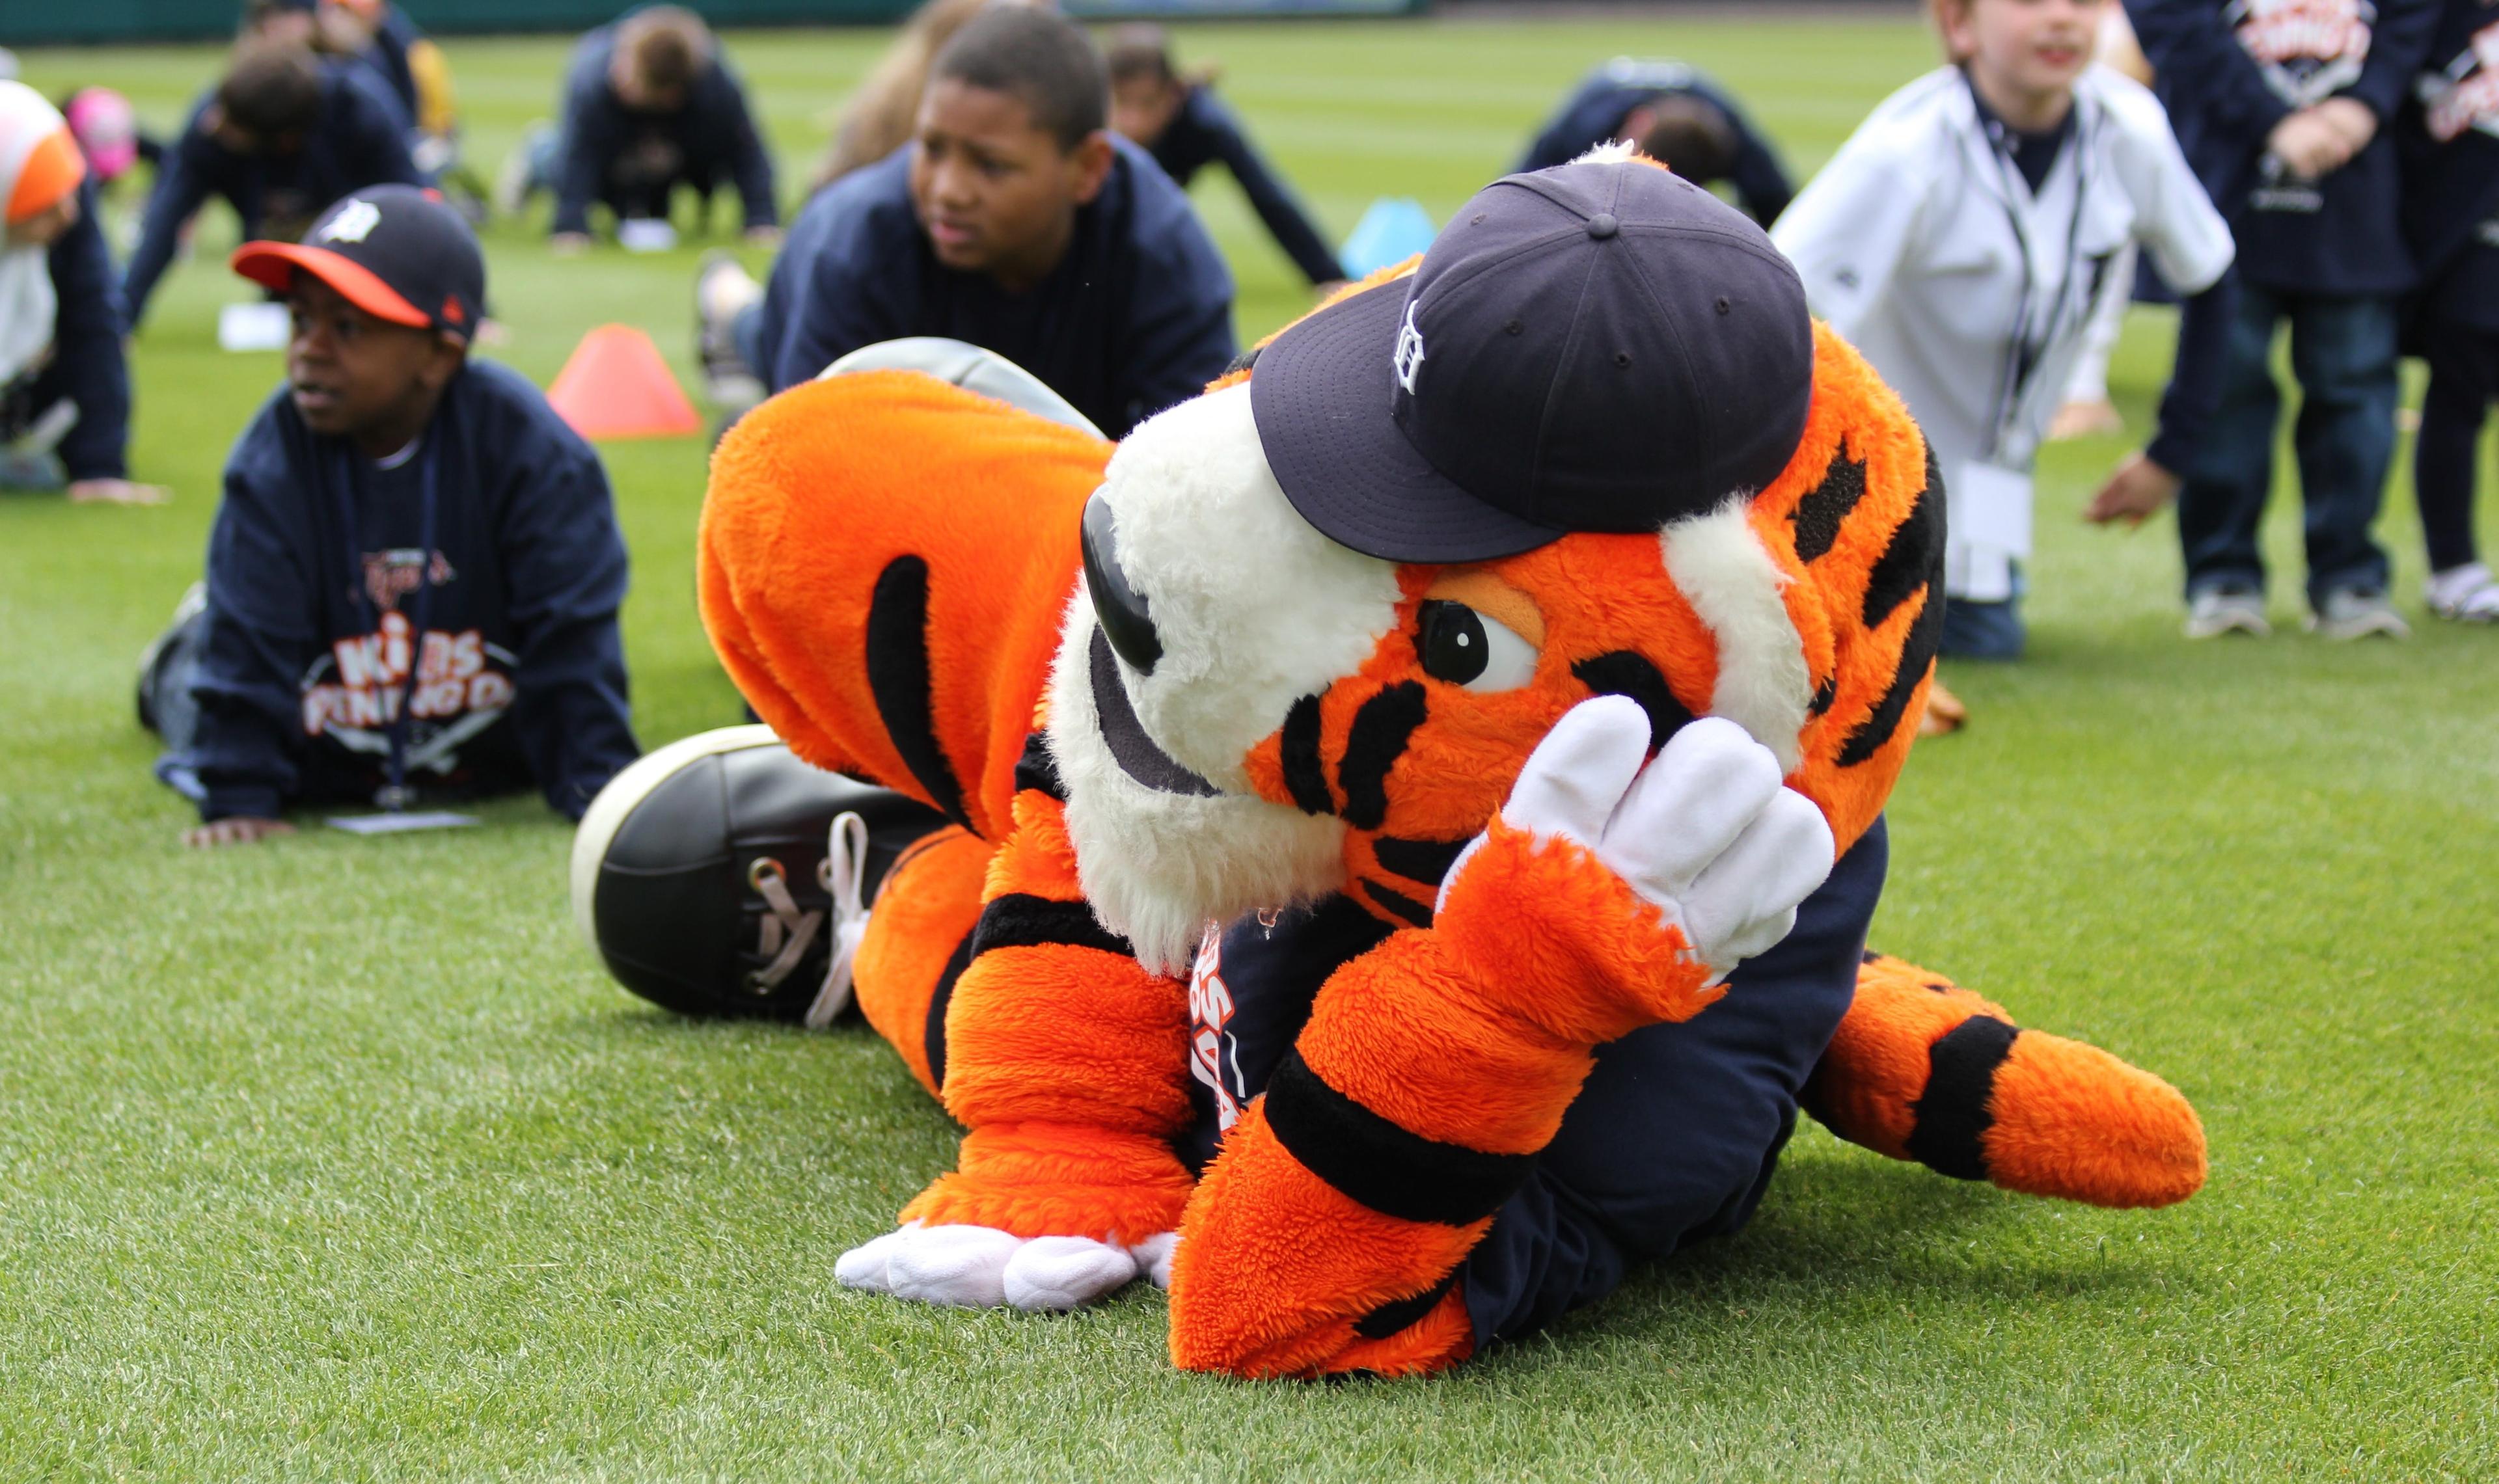 BCBSM and Detroit Tigers Celebrate Children's Health with Annual